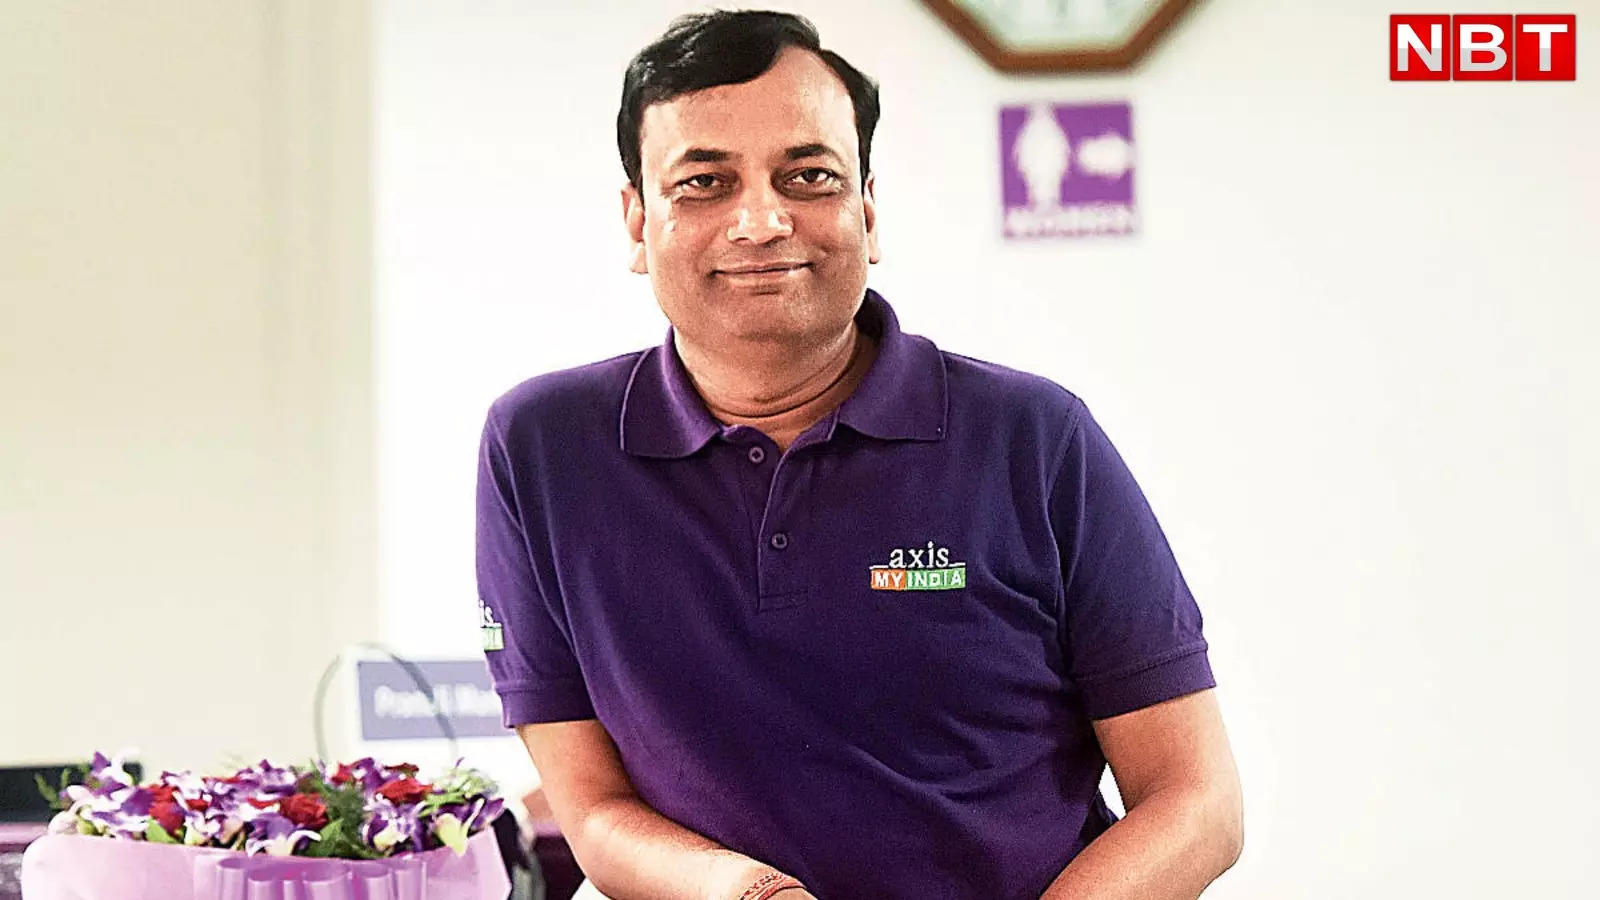 Know about Pradeep Gupta of Axis My India, whose exit polls are watched by all